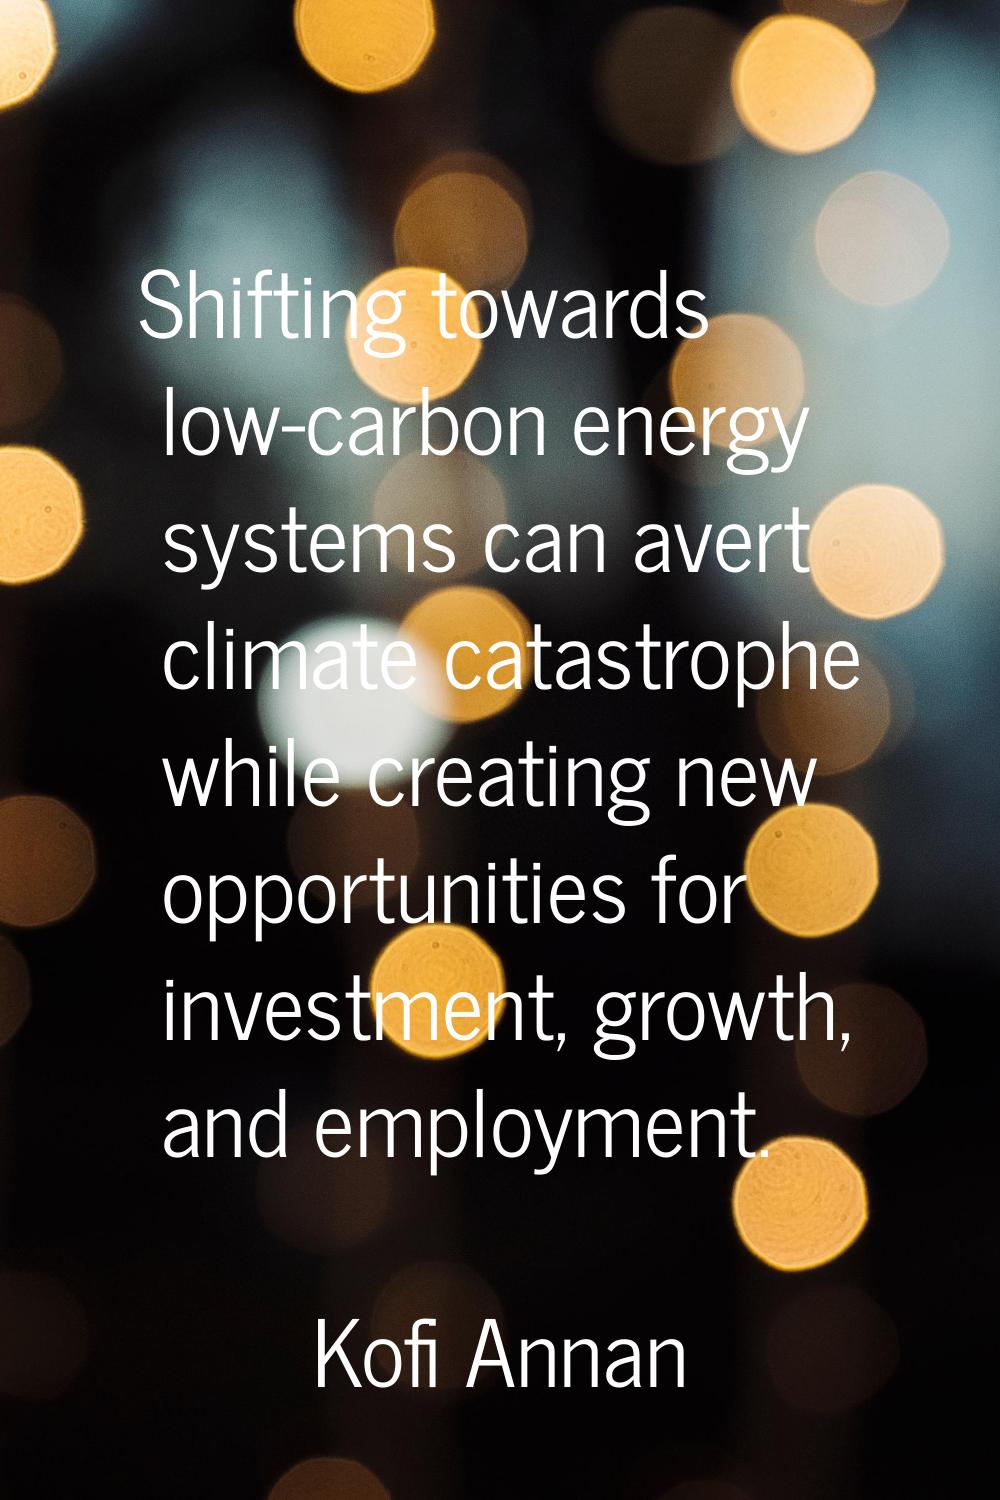 Shifting towards low-carbon energy systems can avert climate catastrophe while creating new opportu